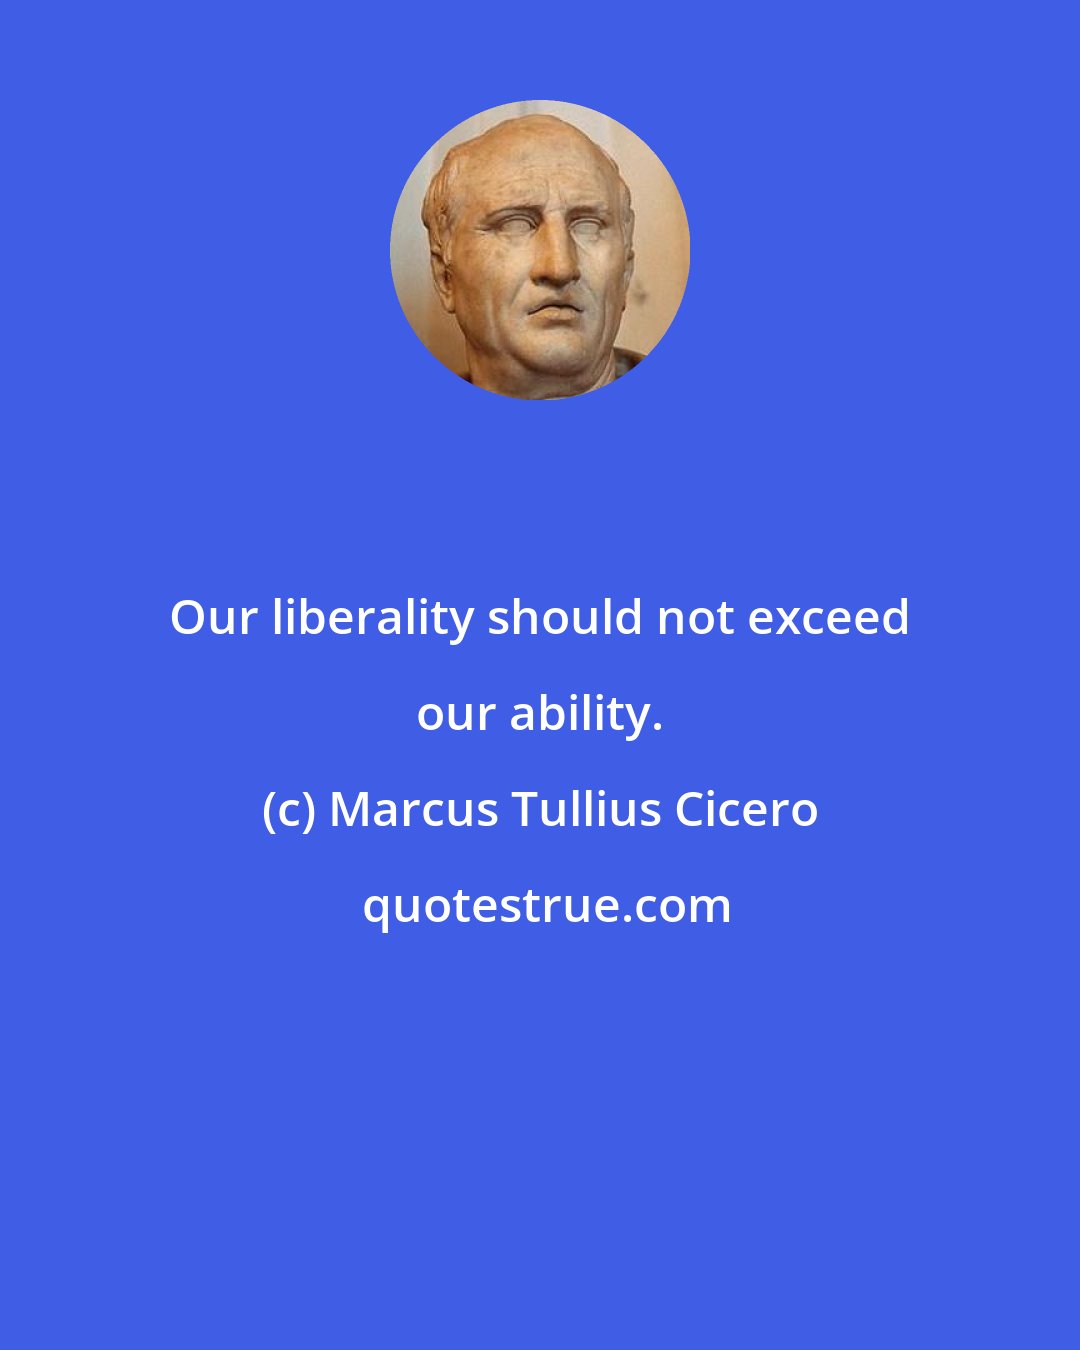 Marcus Tullius Cicero: Our liberality should not exceed our ability.